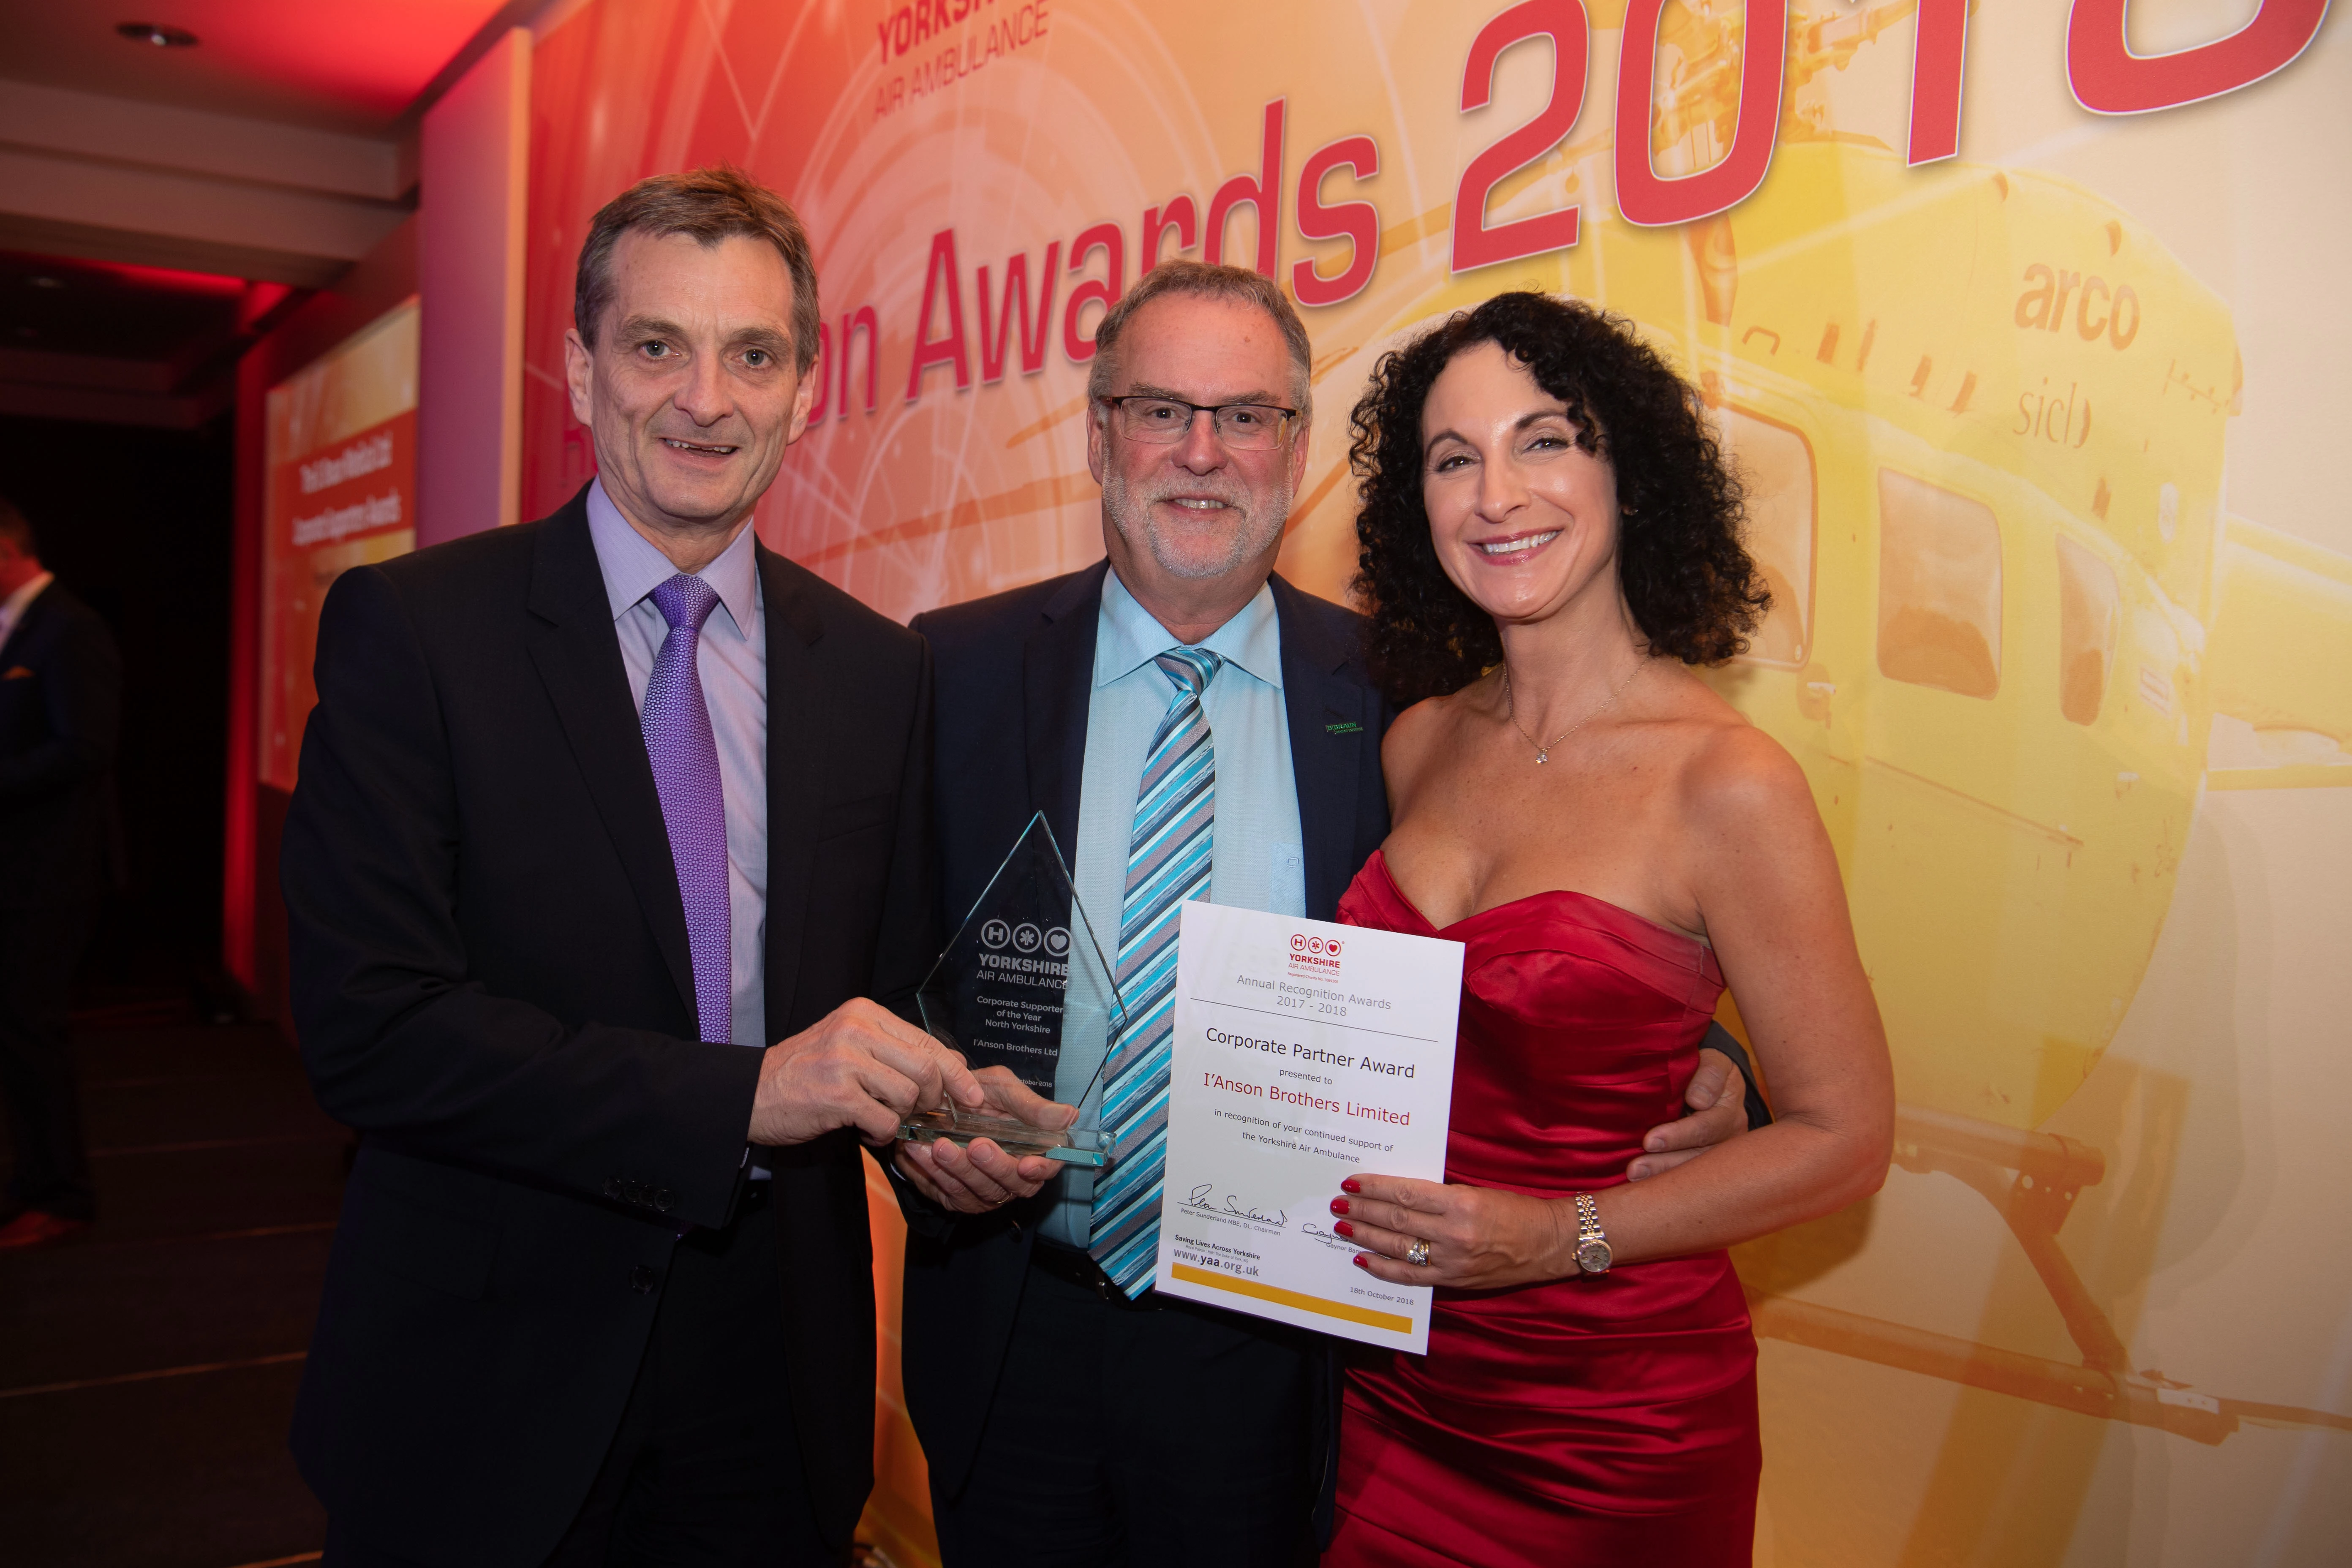 I’Anson managing director, Chris I’Anson (left) celebrates award win with his wife Kathy (right) and Hans Hux – Chairman and CEO of B Braun Ltd (the category sponsor) (middle).